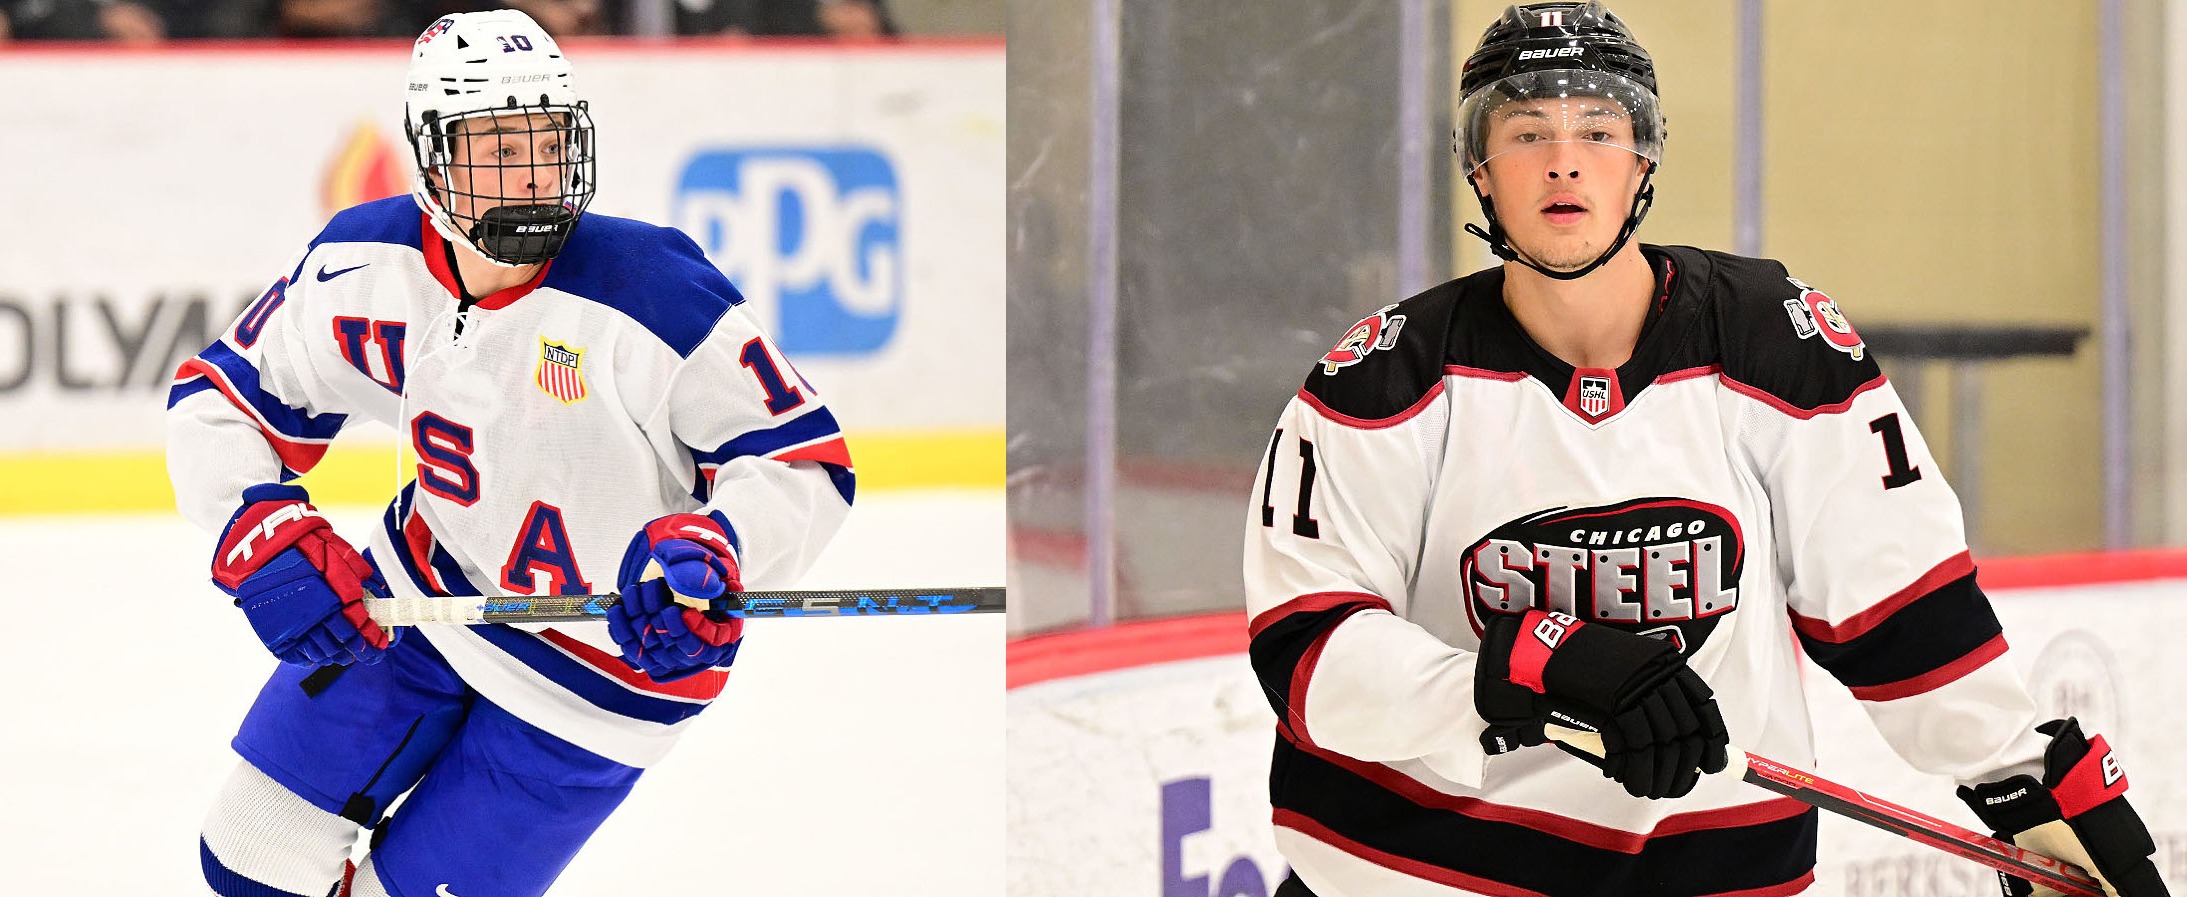 The Hagens brothers could be one of hockey's next great families